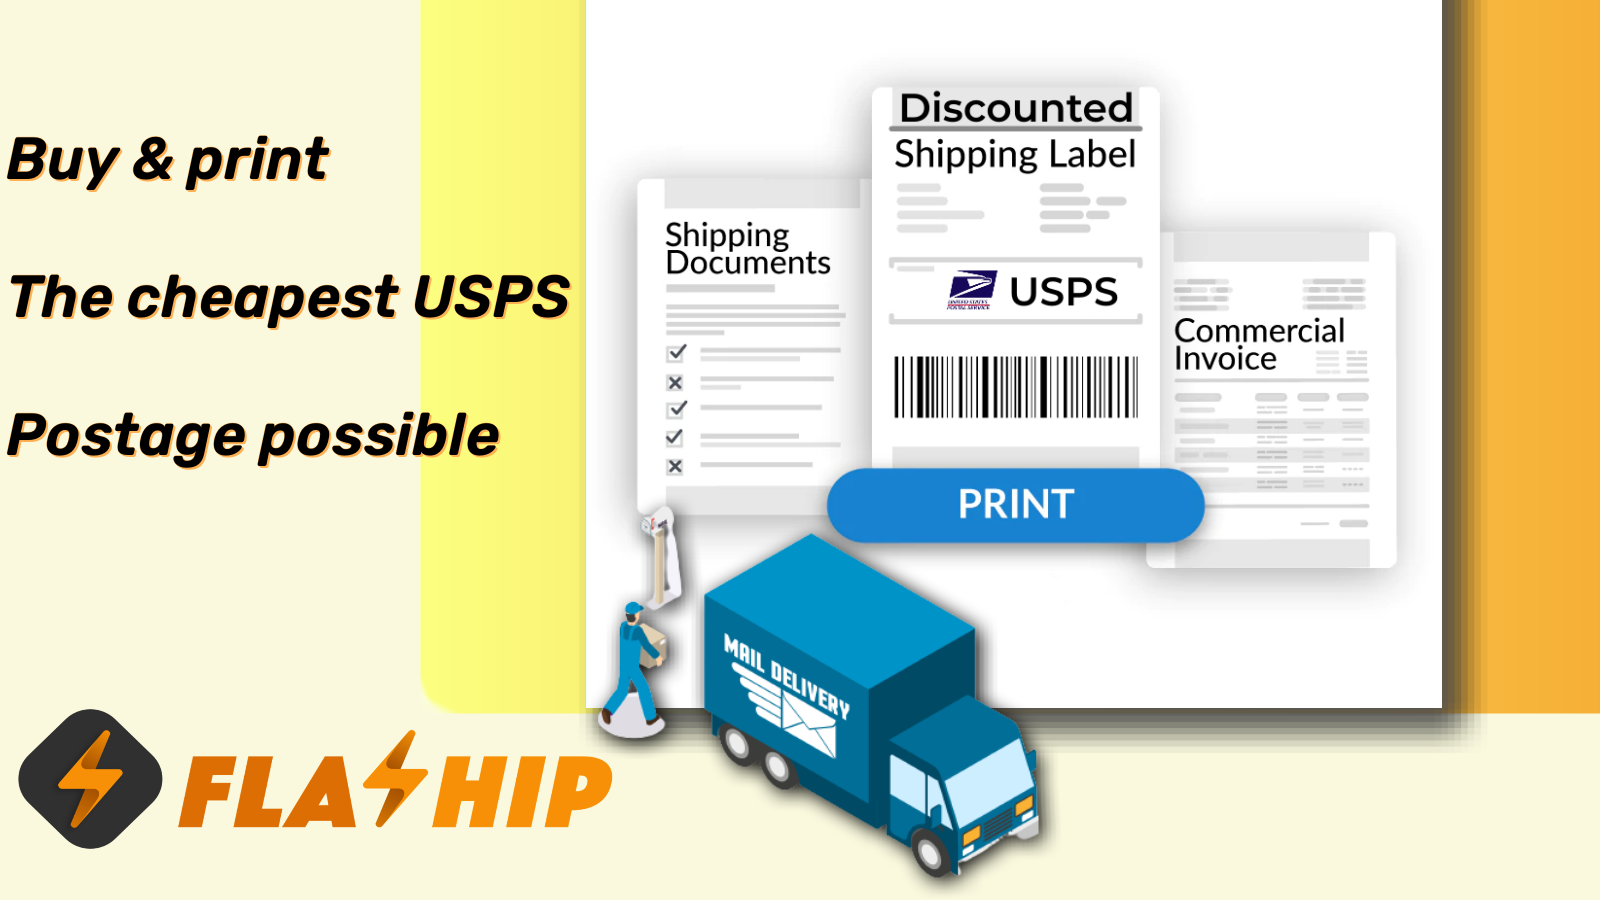 Buy & print the cheapest USPS postage possible.